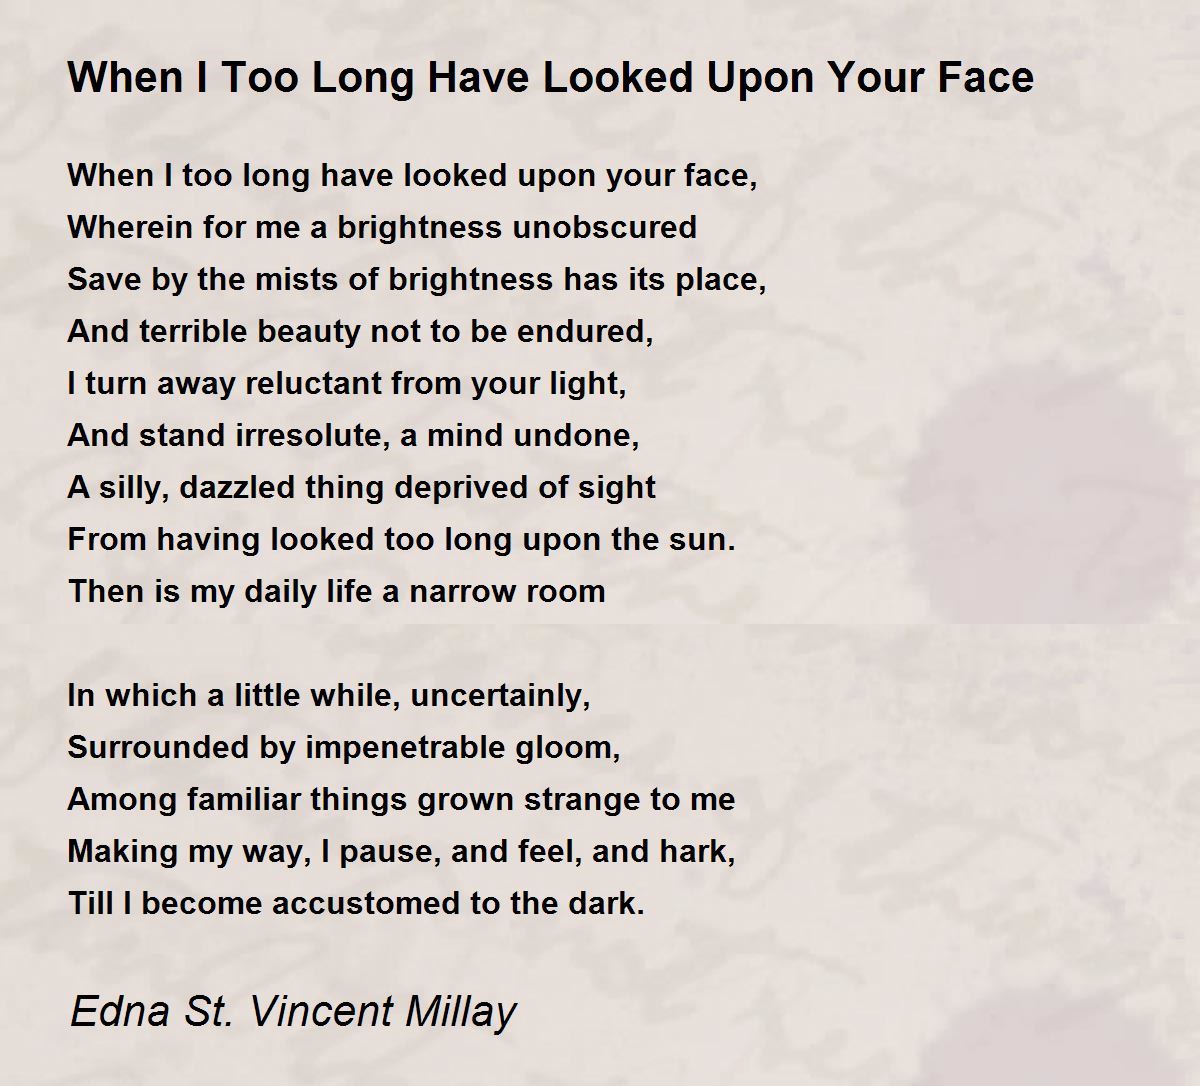 https://img.poemhunter.com/i/poem_images/317/when-i-too-long-have-looked-upon-your-face.jpg